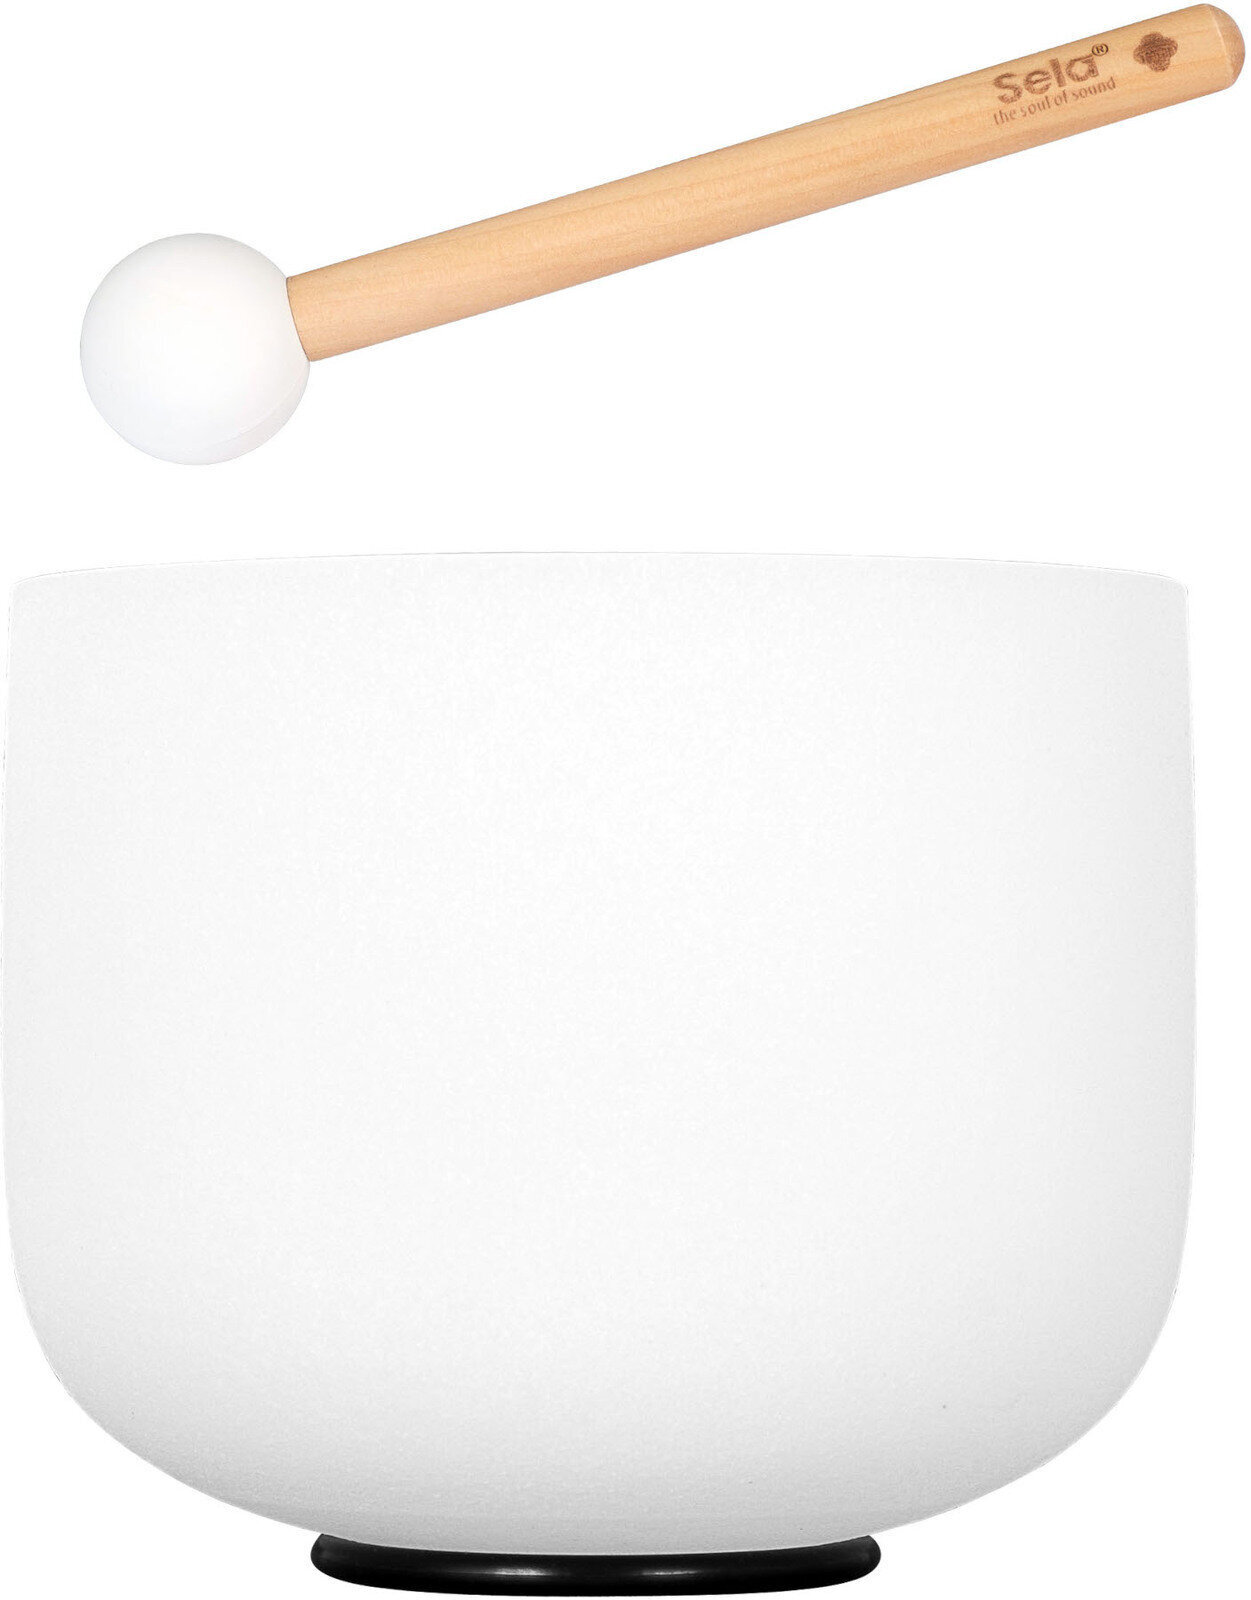 Percussion for music therapy Sela 10" Crystal Singing Bowl Frosted 432 Hz D incl. 1 Wood Mallet